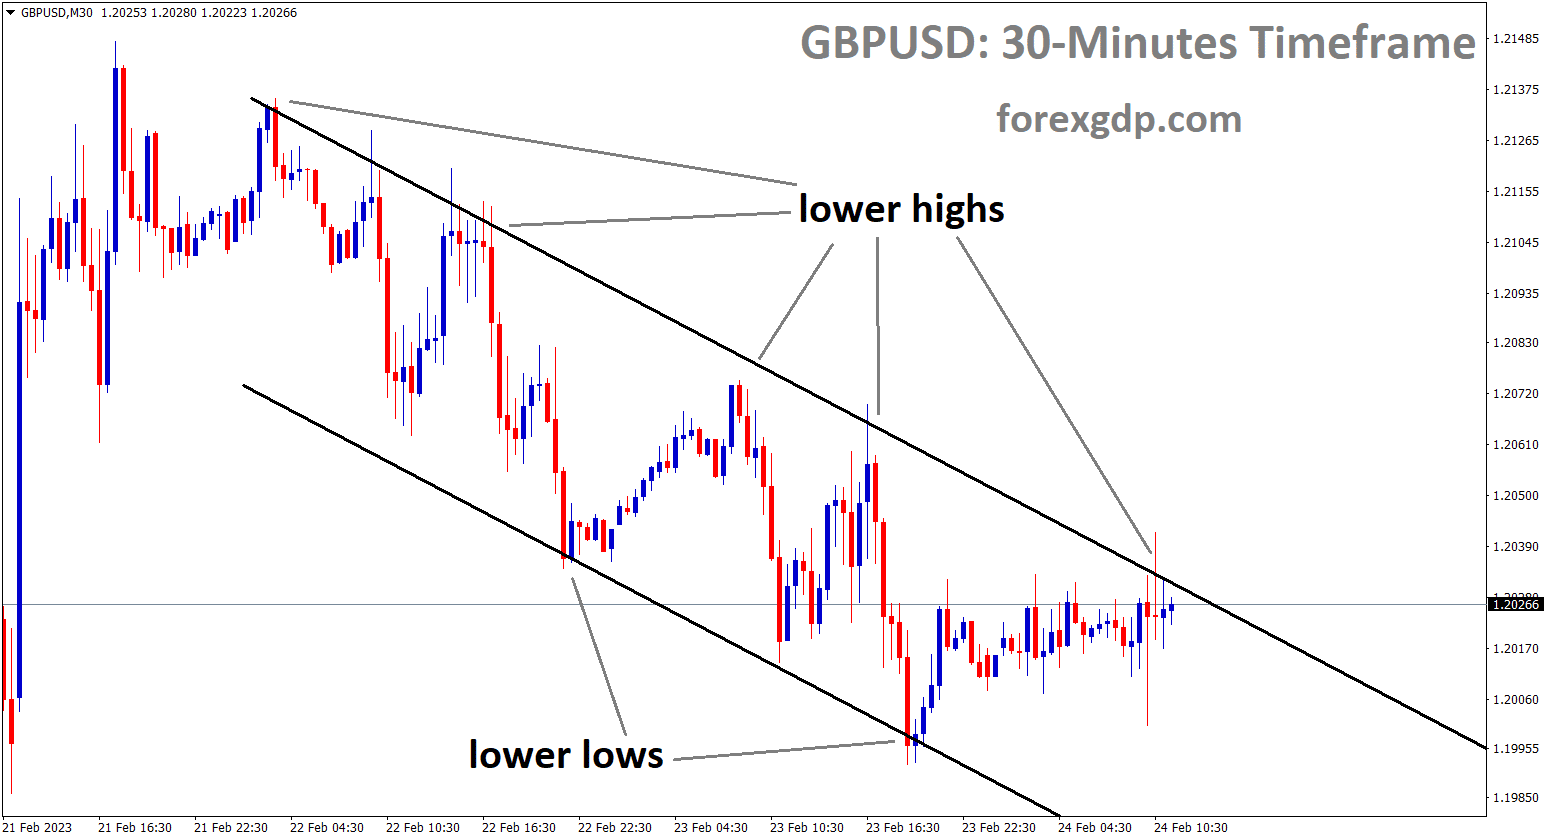 GBPUSD is moving in Descending channel and the market has reached lower high area of the channel.